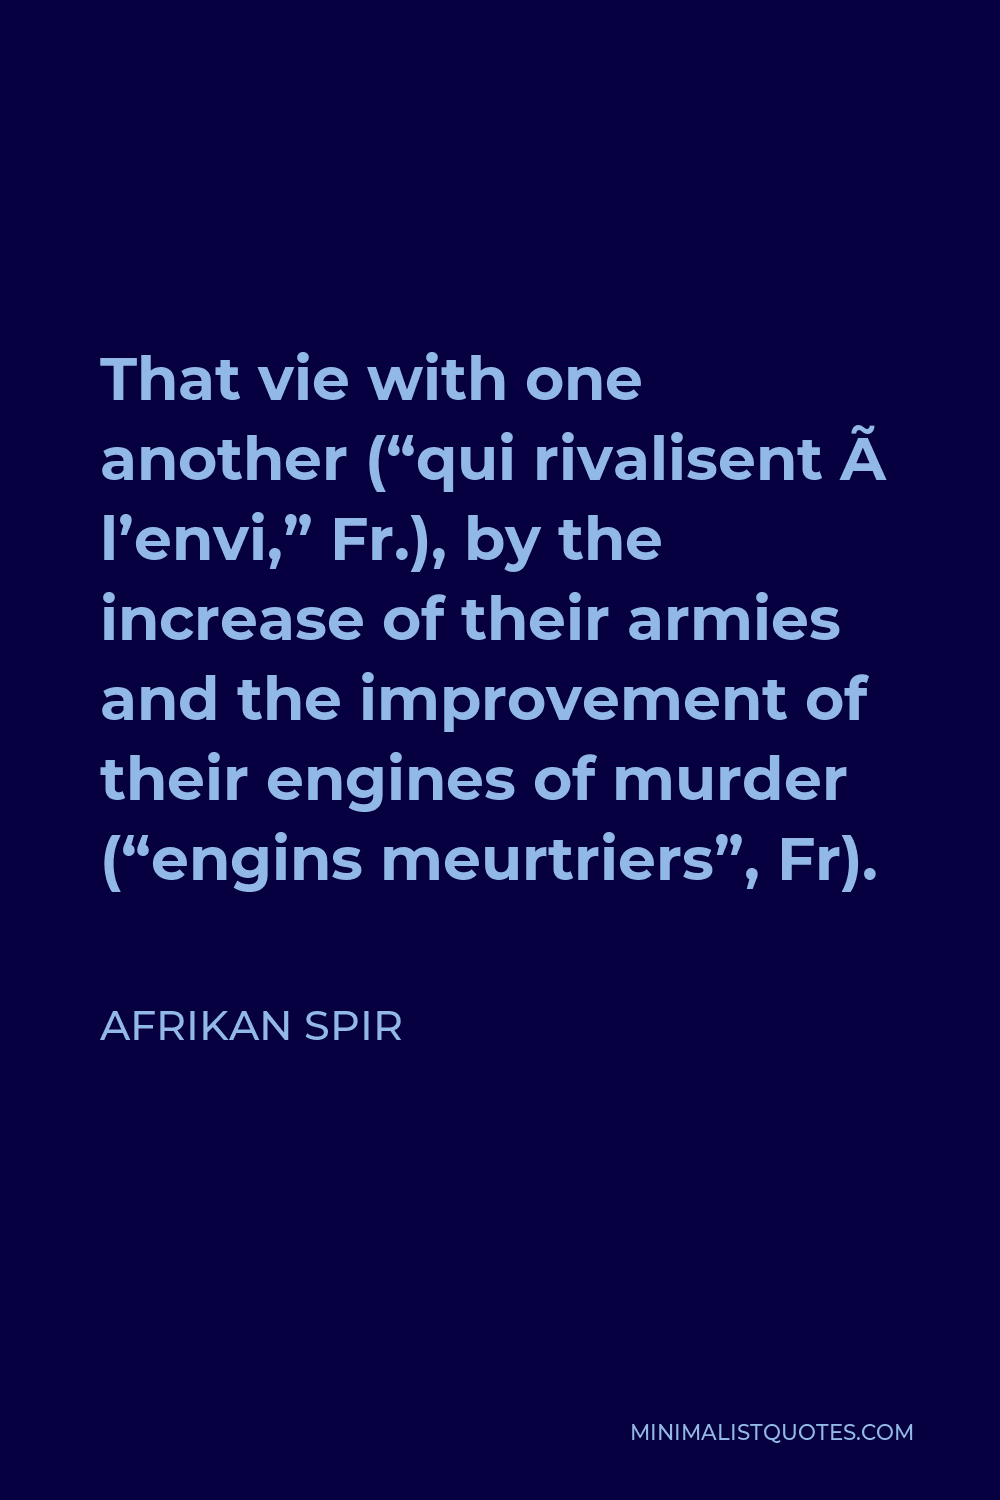 Afrikan Spir Quote - That vie with one another (“qui rivalisent à l’envi,” Fr.), by the increase of their armies and the improvement of their engines of murder (“engins meurtriers”, Fr).